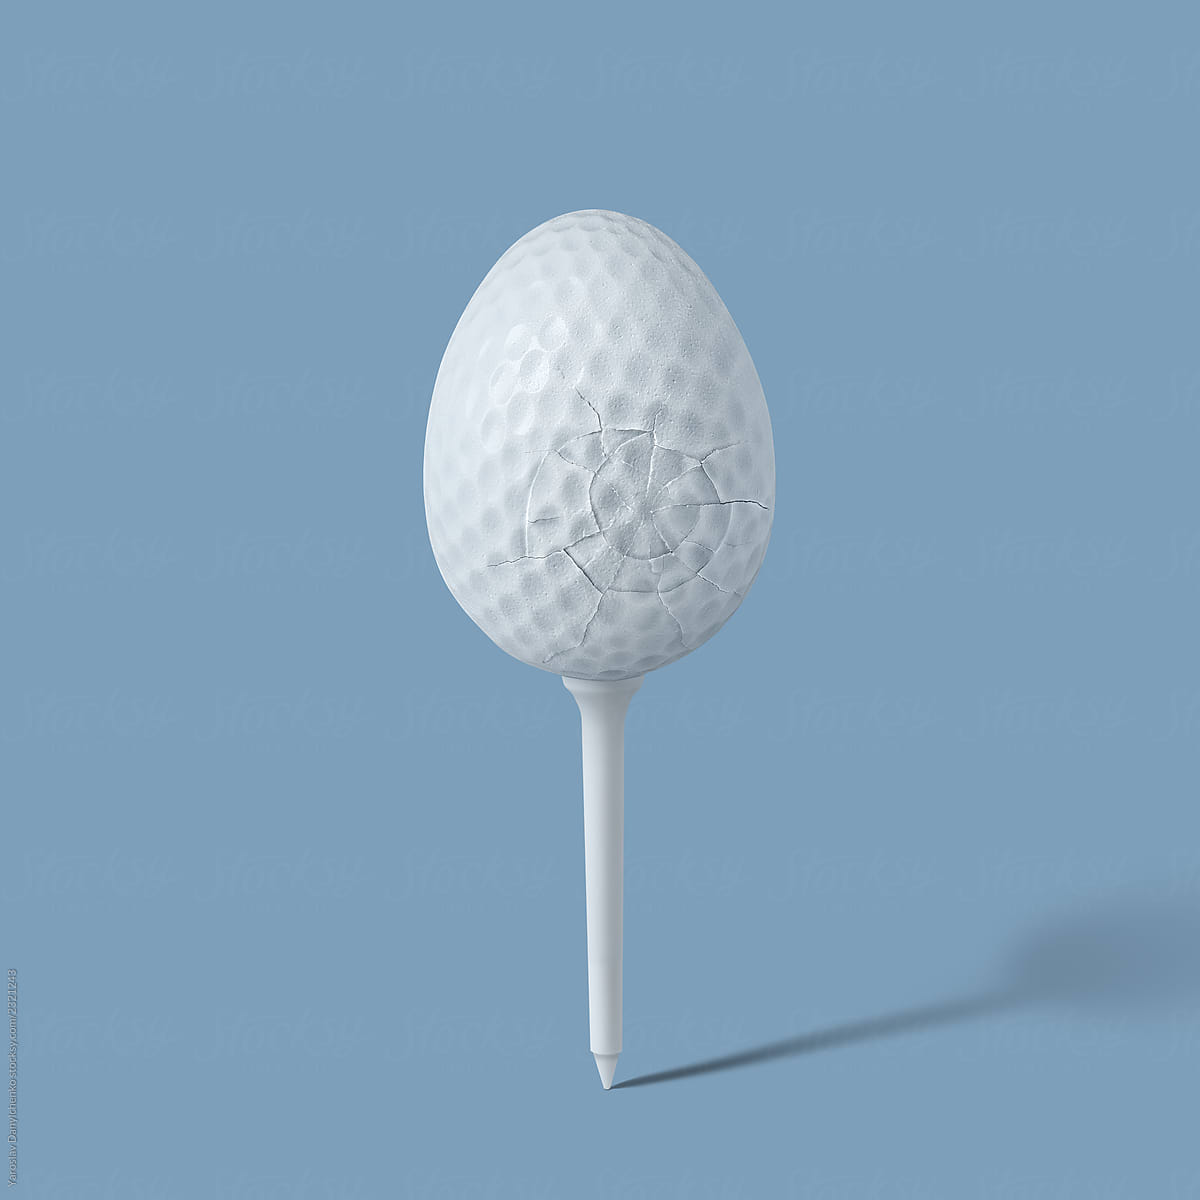 Golf ball in the form of a broken egg on a blue background with